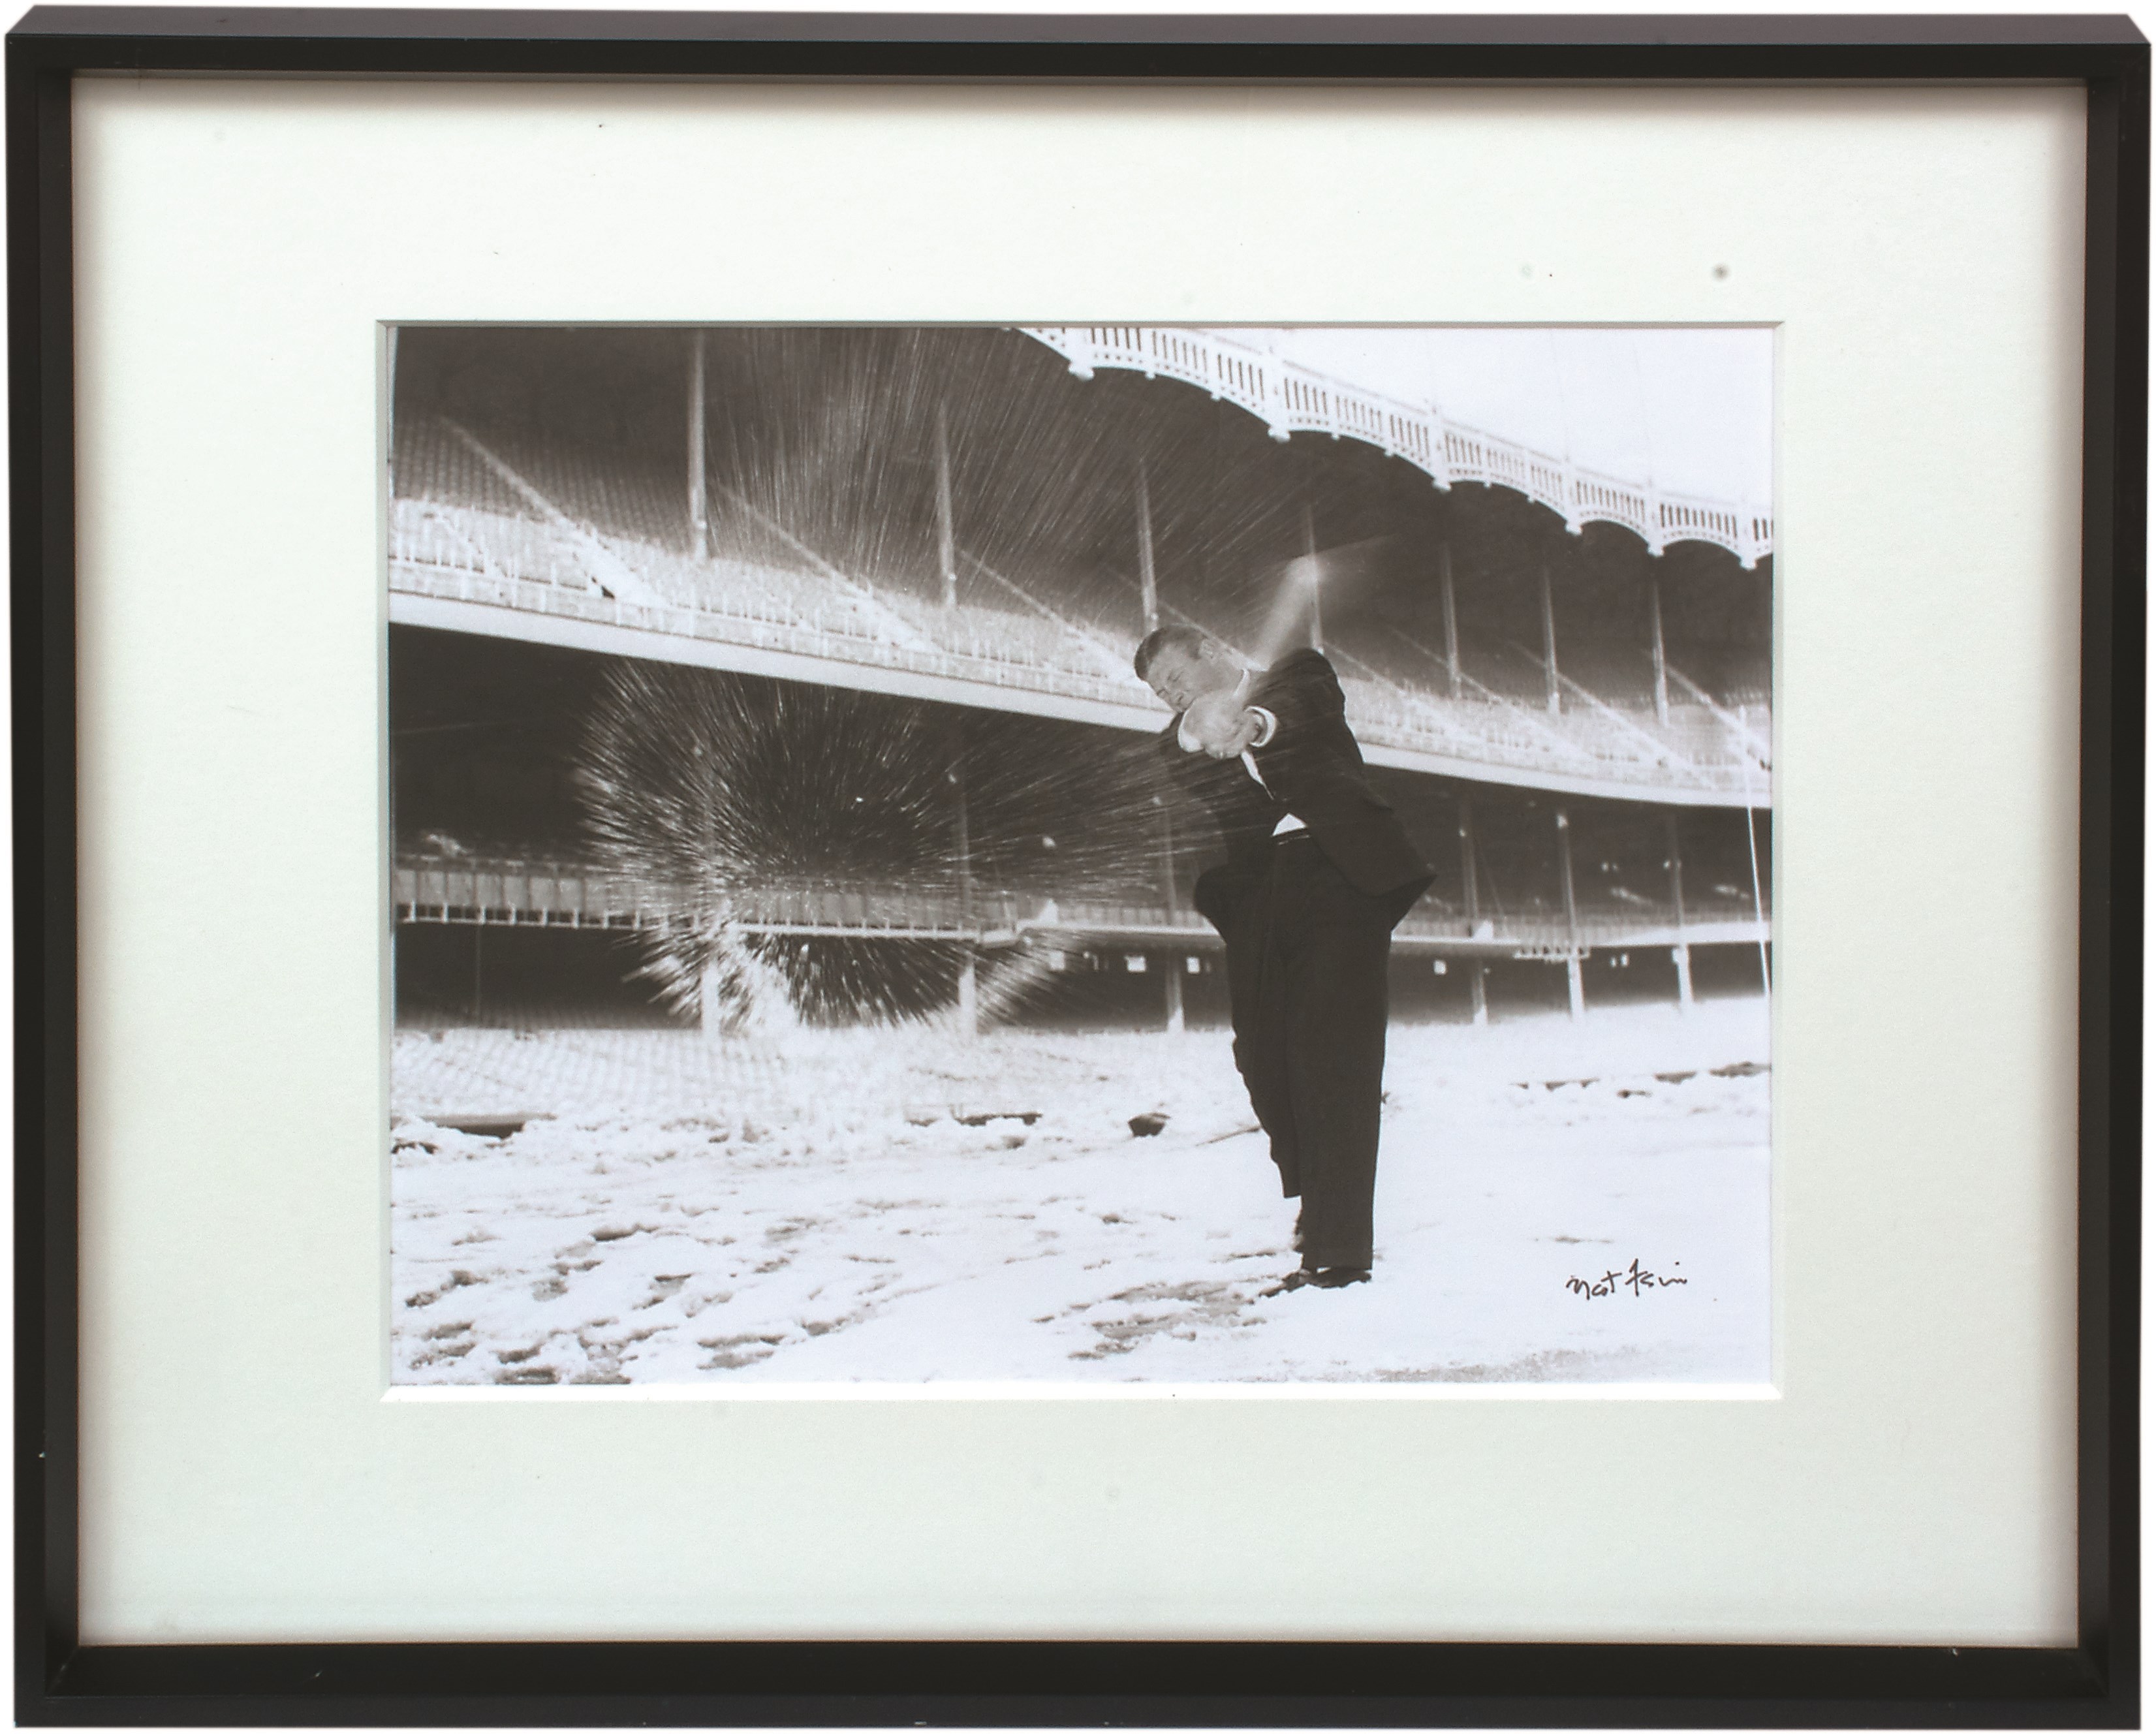 - 1957 Mickey Mantle Belting Snow Balls in Yankee Stadium Signed by Nat Fein - from Original Negative